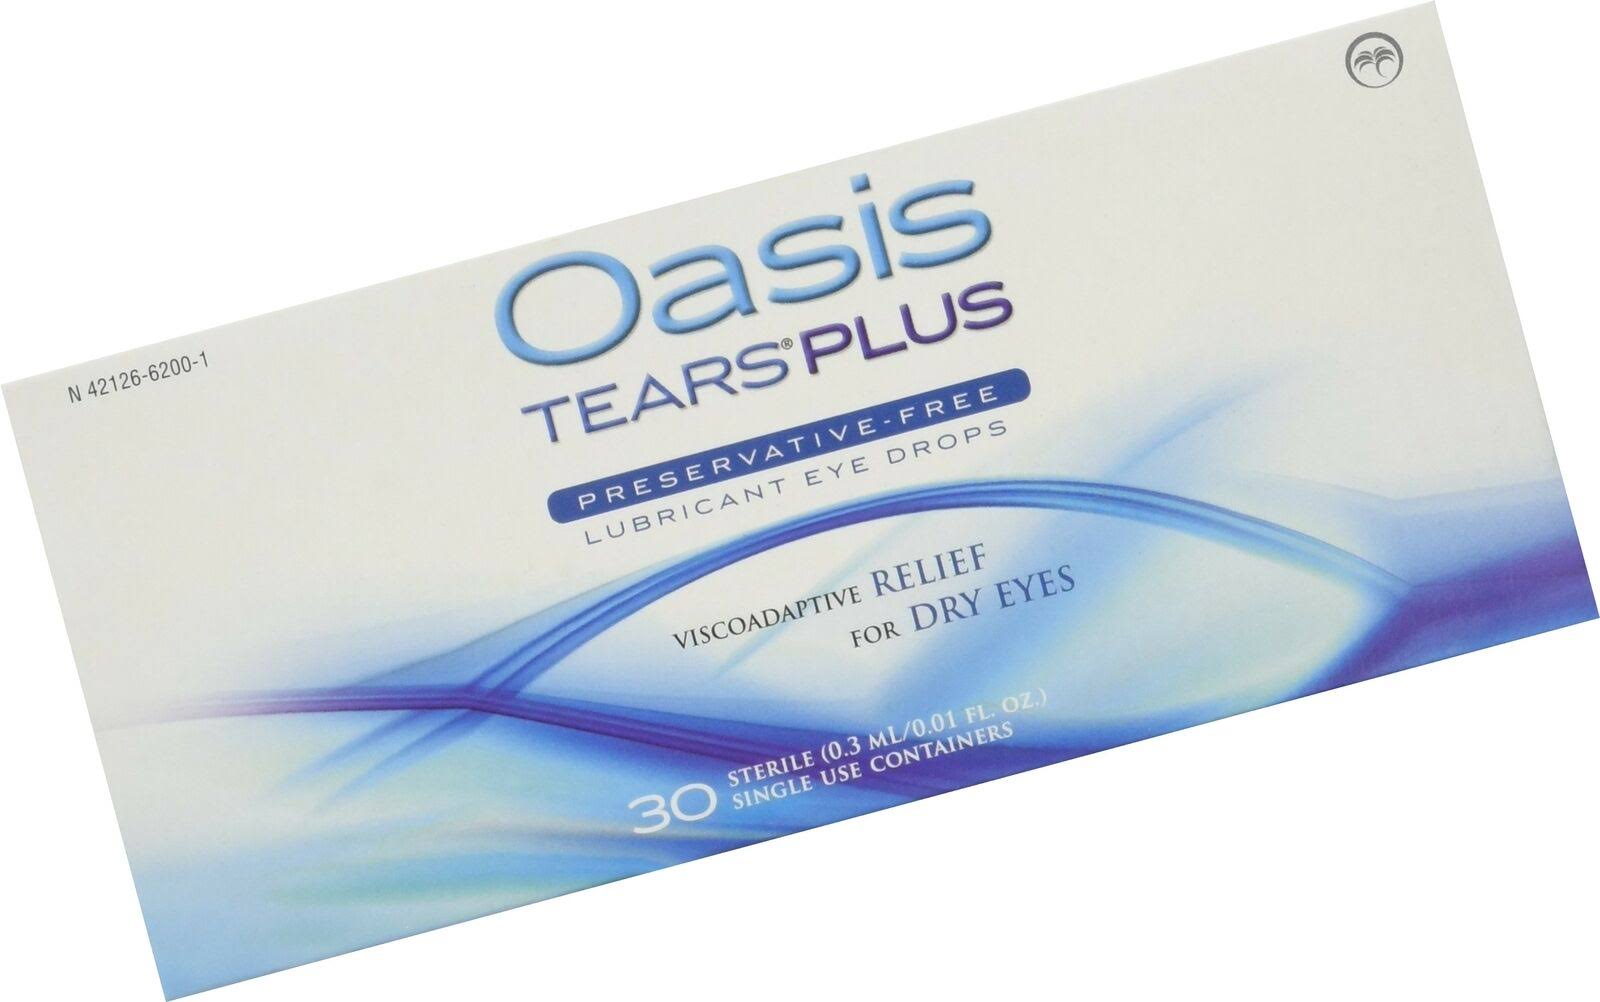 Oasis TEARS PLUS Preservative-Free Lubricant Eye Drops, 30 containers,